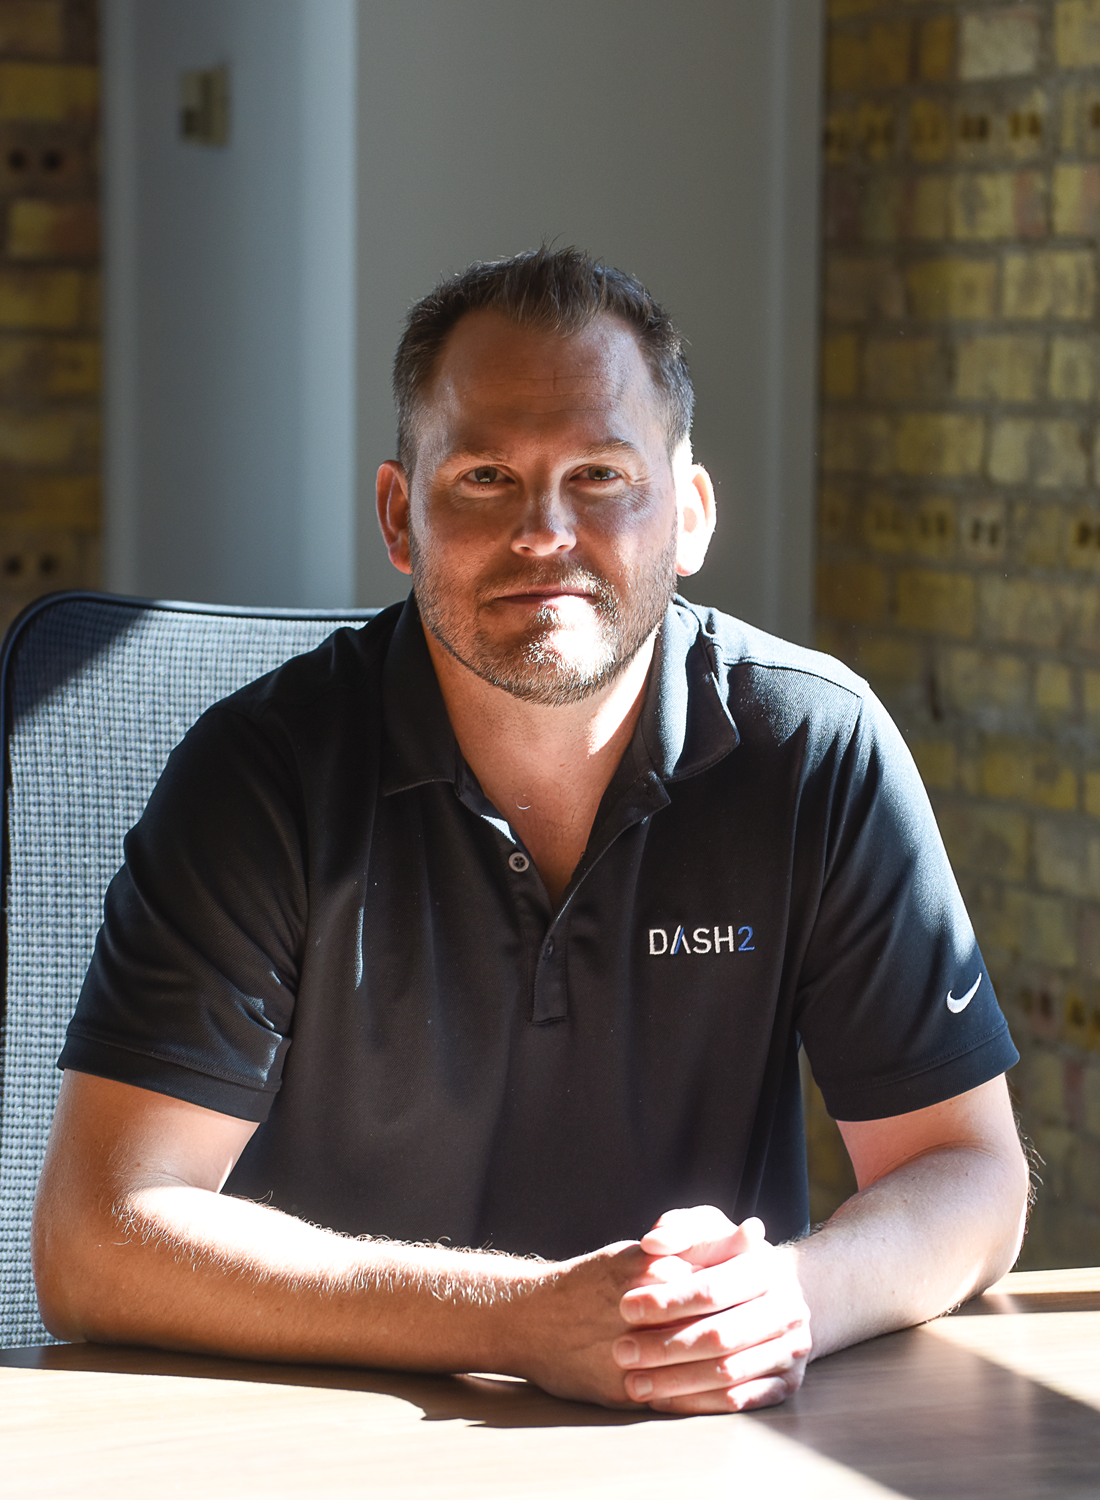 Gregory Larsen is a Westminster alum and Marine Corps veteran who serves as the director of IT services for the Dash2 Group.